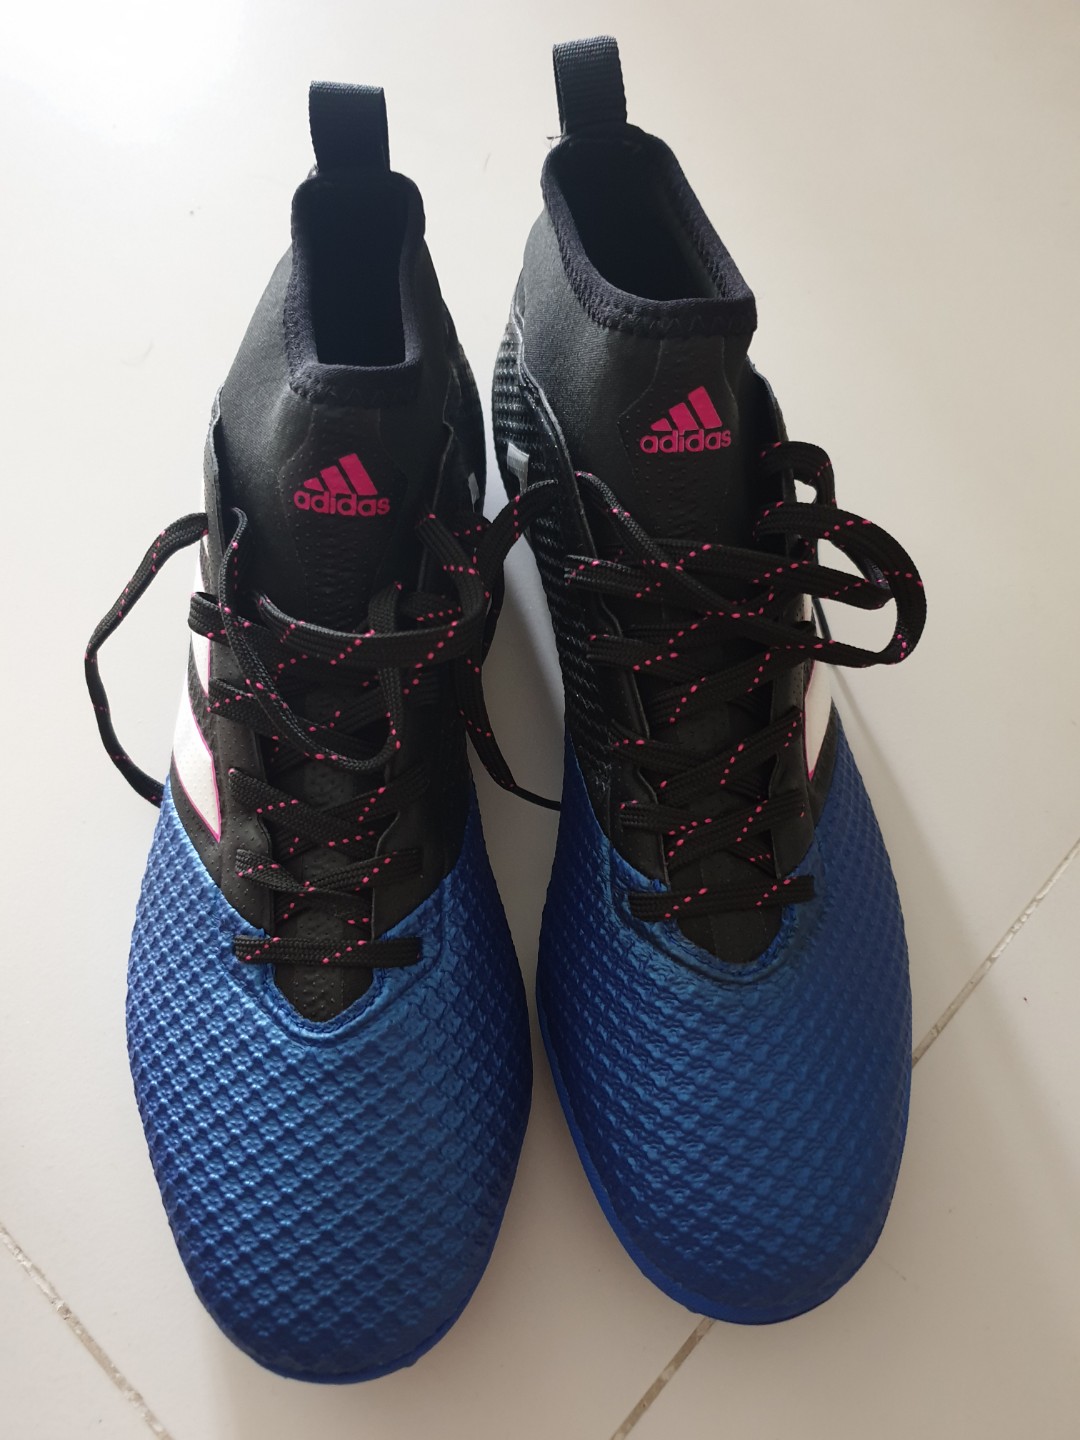 adidas ace 17.3 sports direct